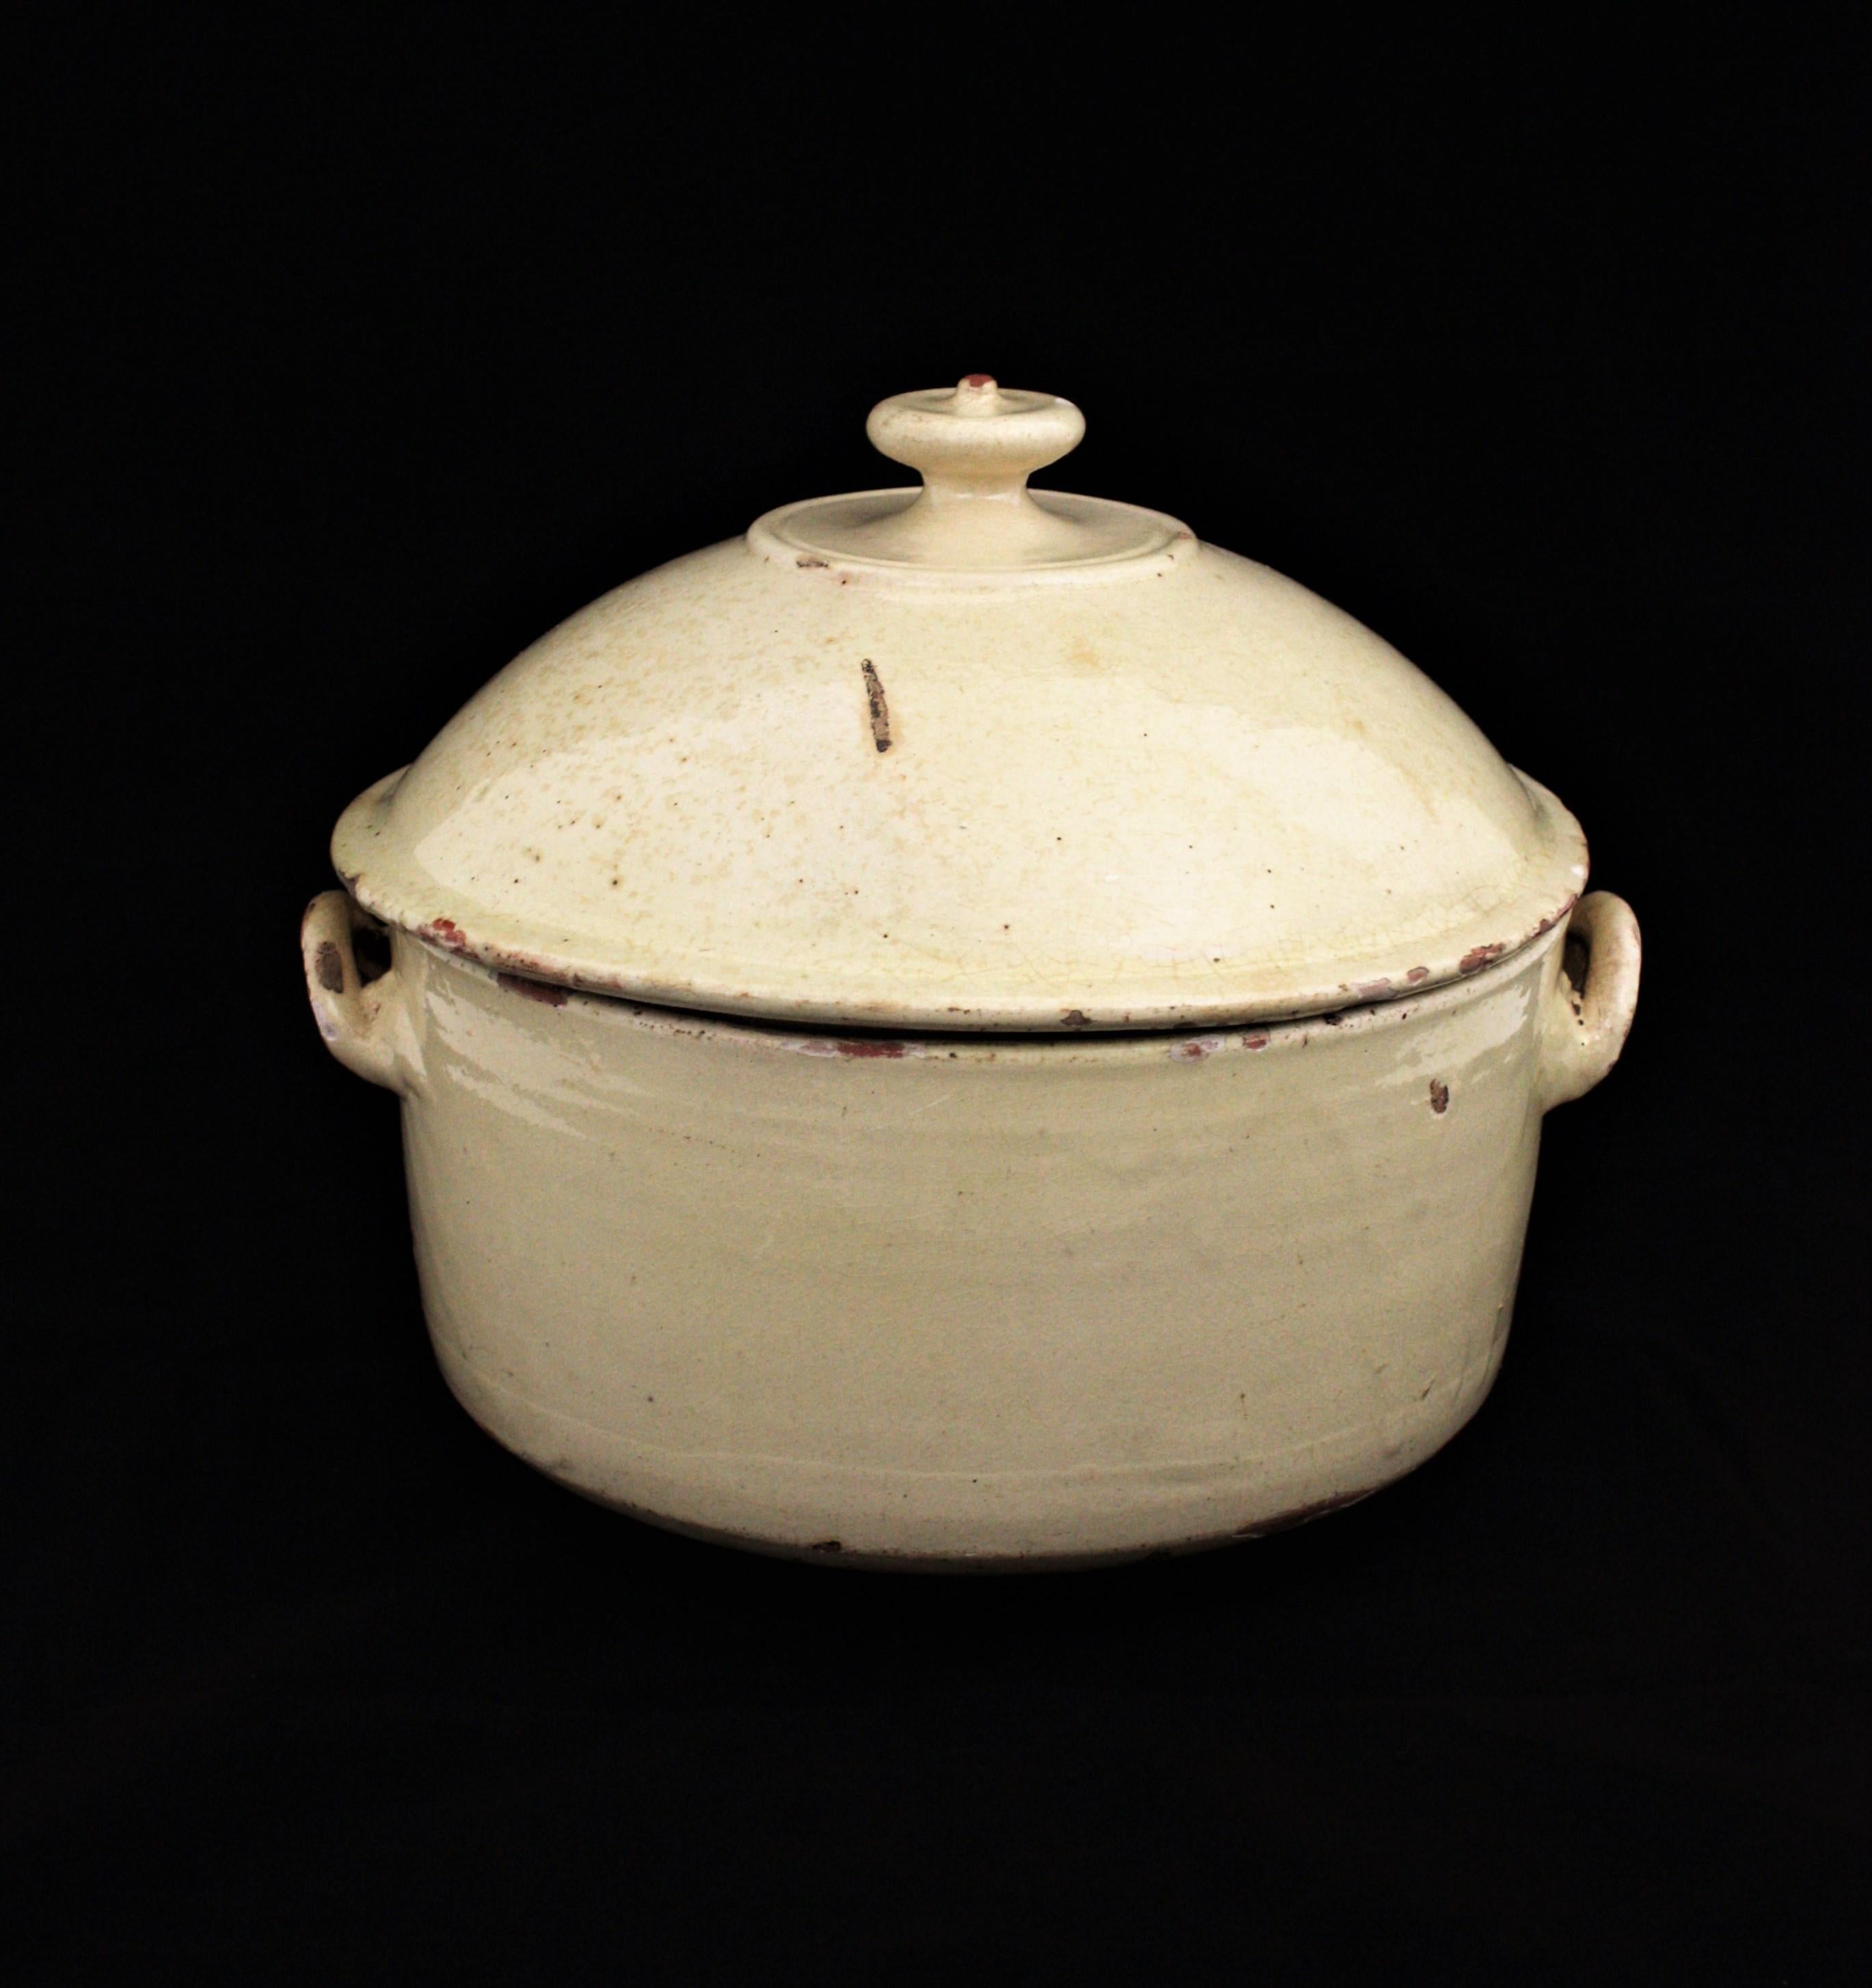 Lovely beige glazed terracotta soup tureen / kitchen pot with handles, France, 19th century.
This French Provincial tureen will be a nice accent to any countryside house kitchen. Beautiful also in any contemporary or classical ambiance.
It can be